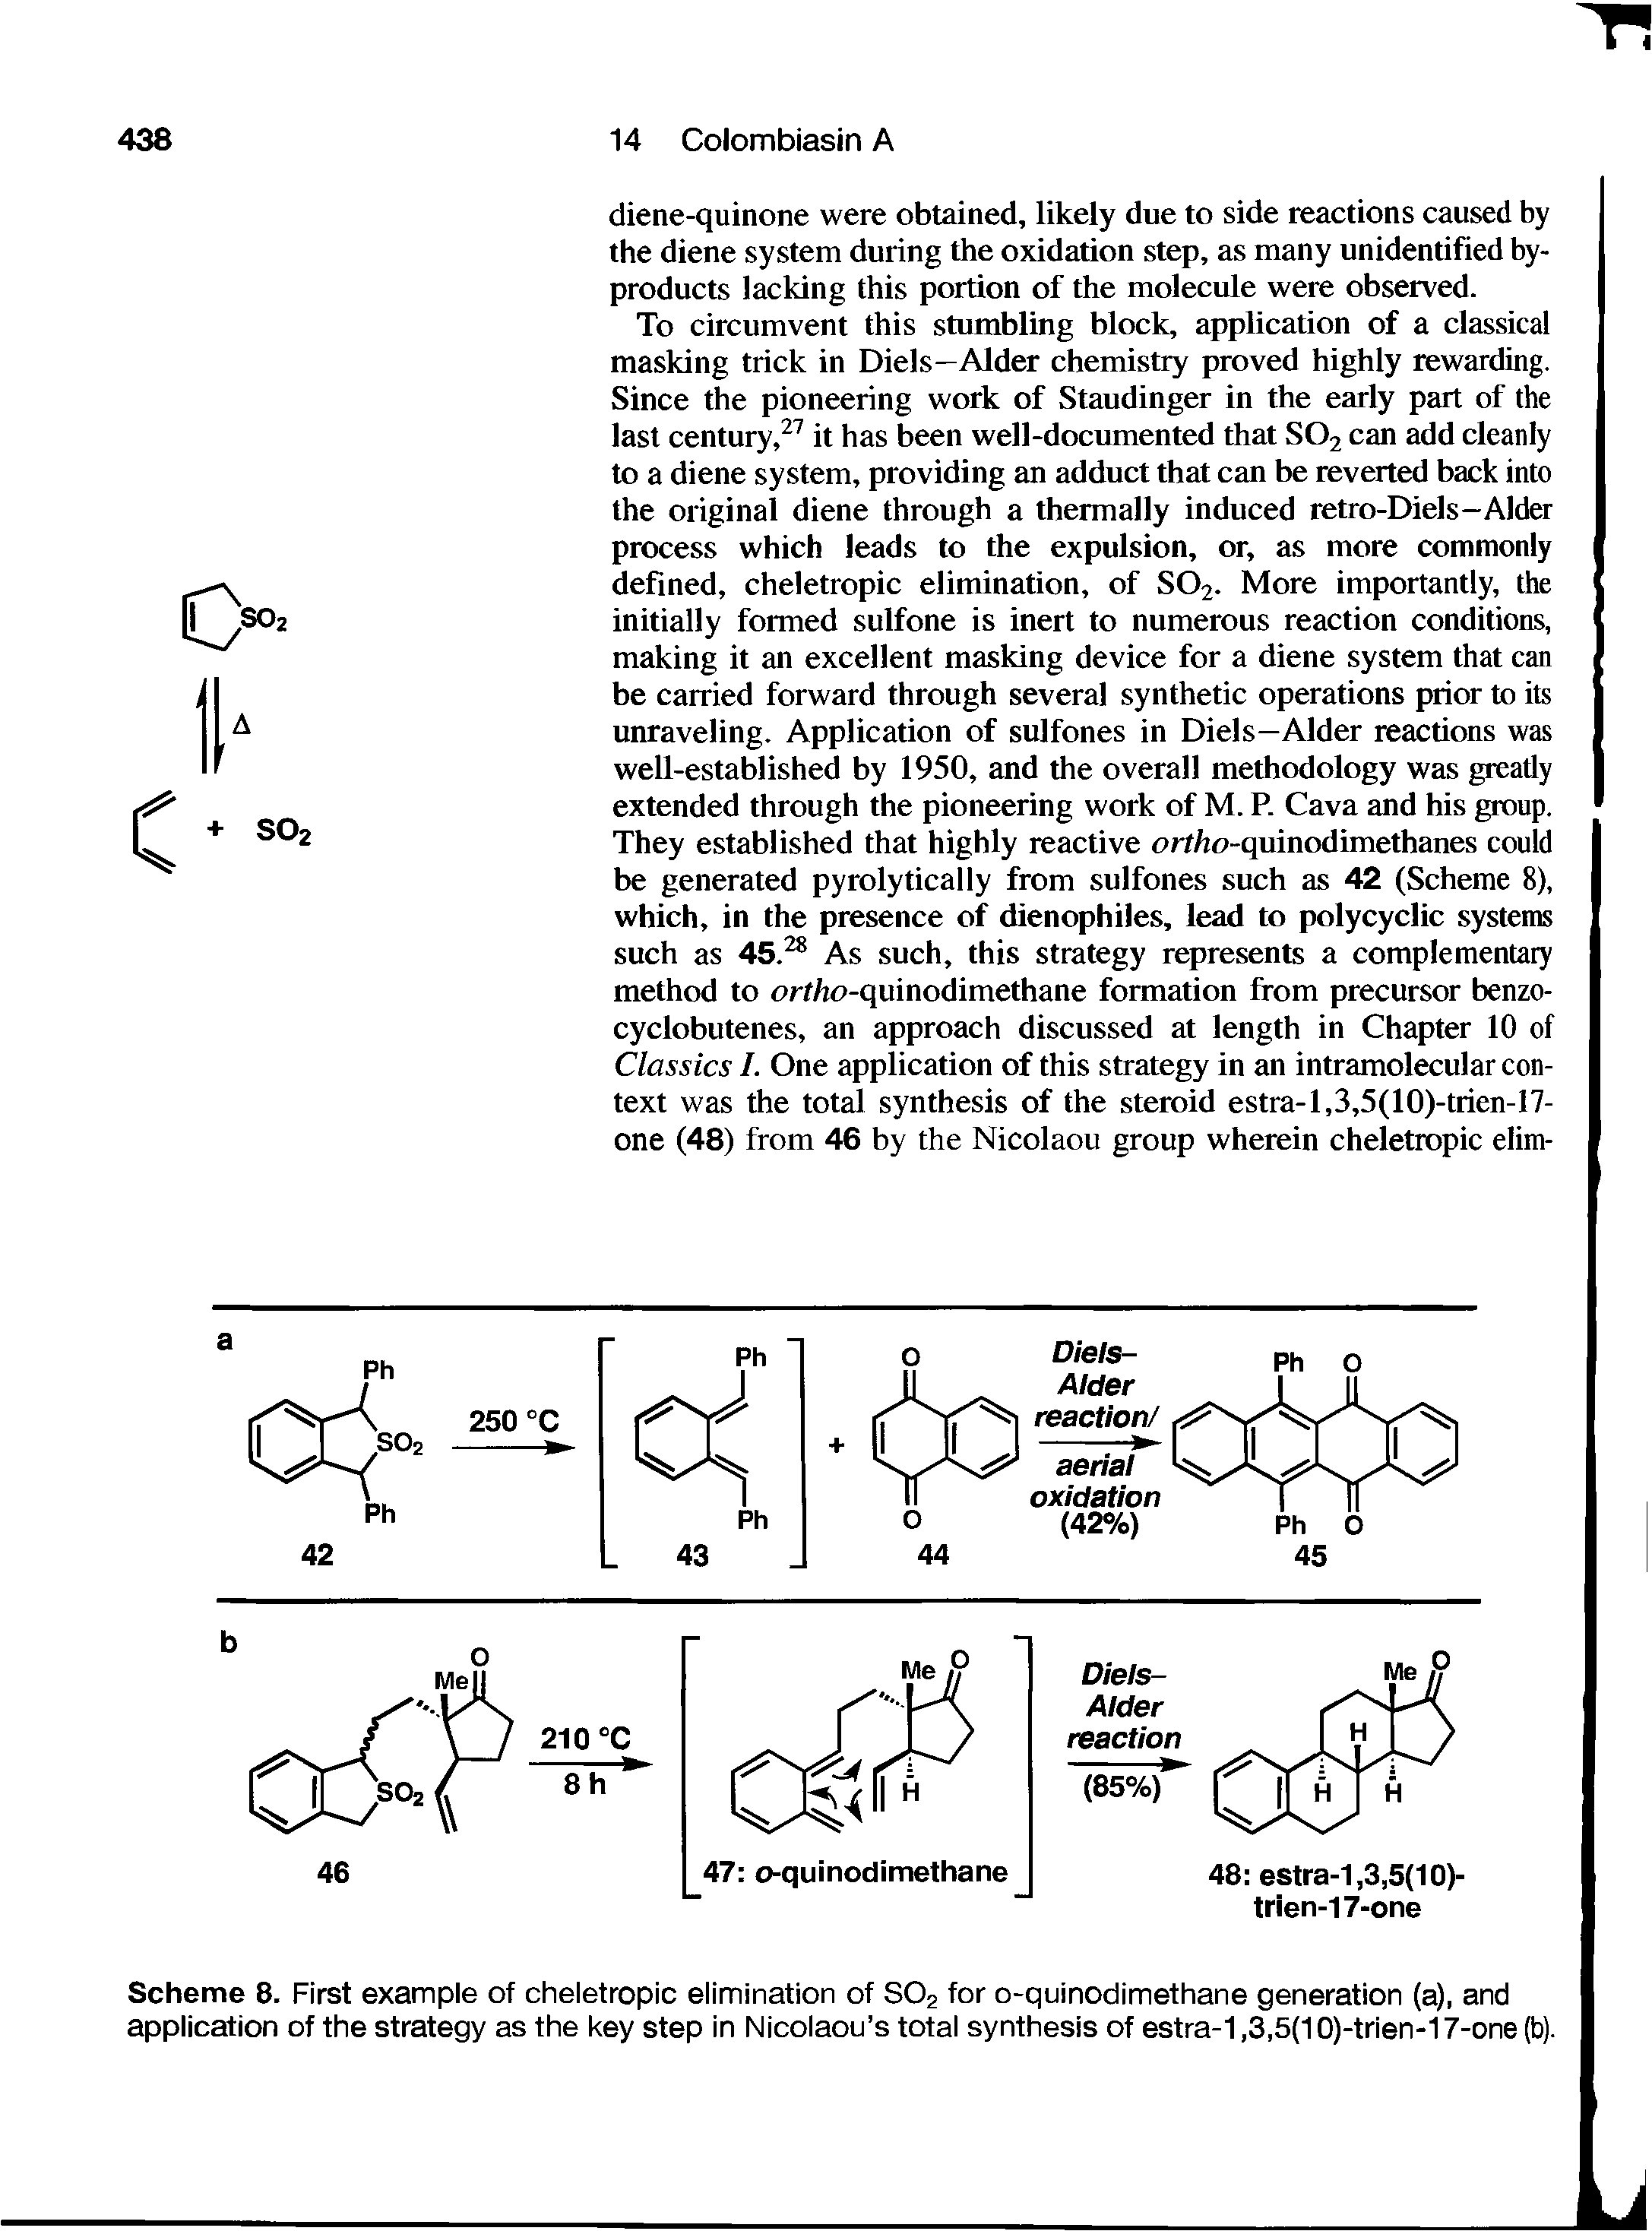 Scheme 8. First example of cheletropic elimination of SO2 for o-quinodimethane generation (a), and application of the strategy as the key step in Nicolaou s total synthesis of estra-1,3,5(10)-trien-17-one (b).